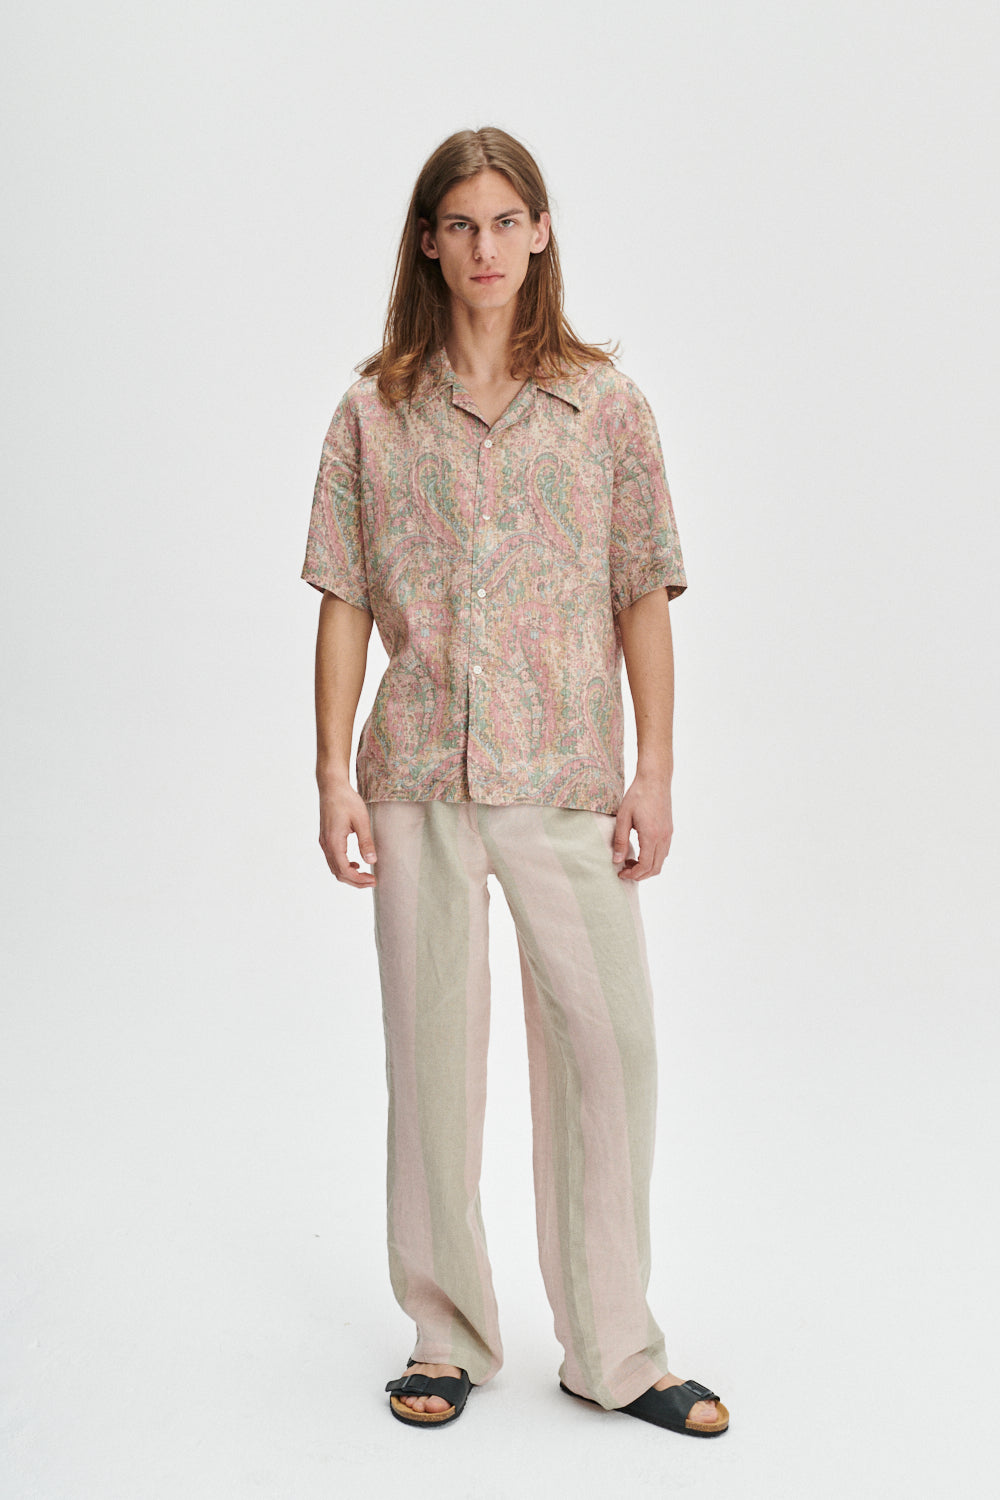 Short Sleeve Relaxed Cuban Collar Shirt in a Pink, Green and Beige Shaded Paisley Design Japanese Linen